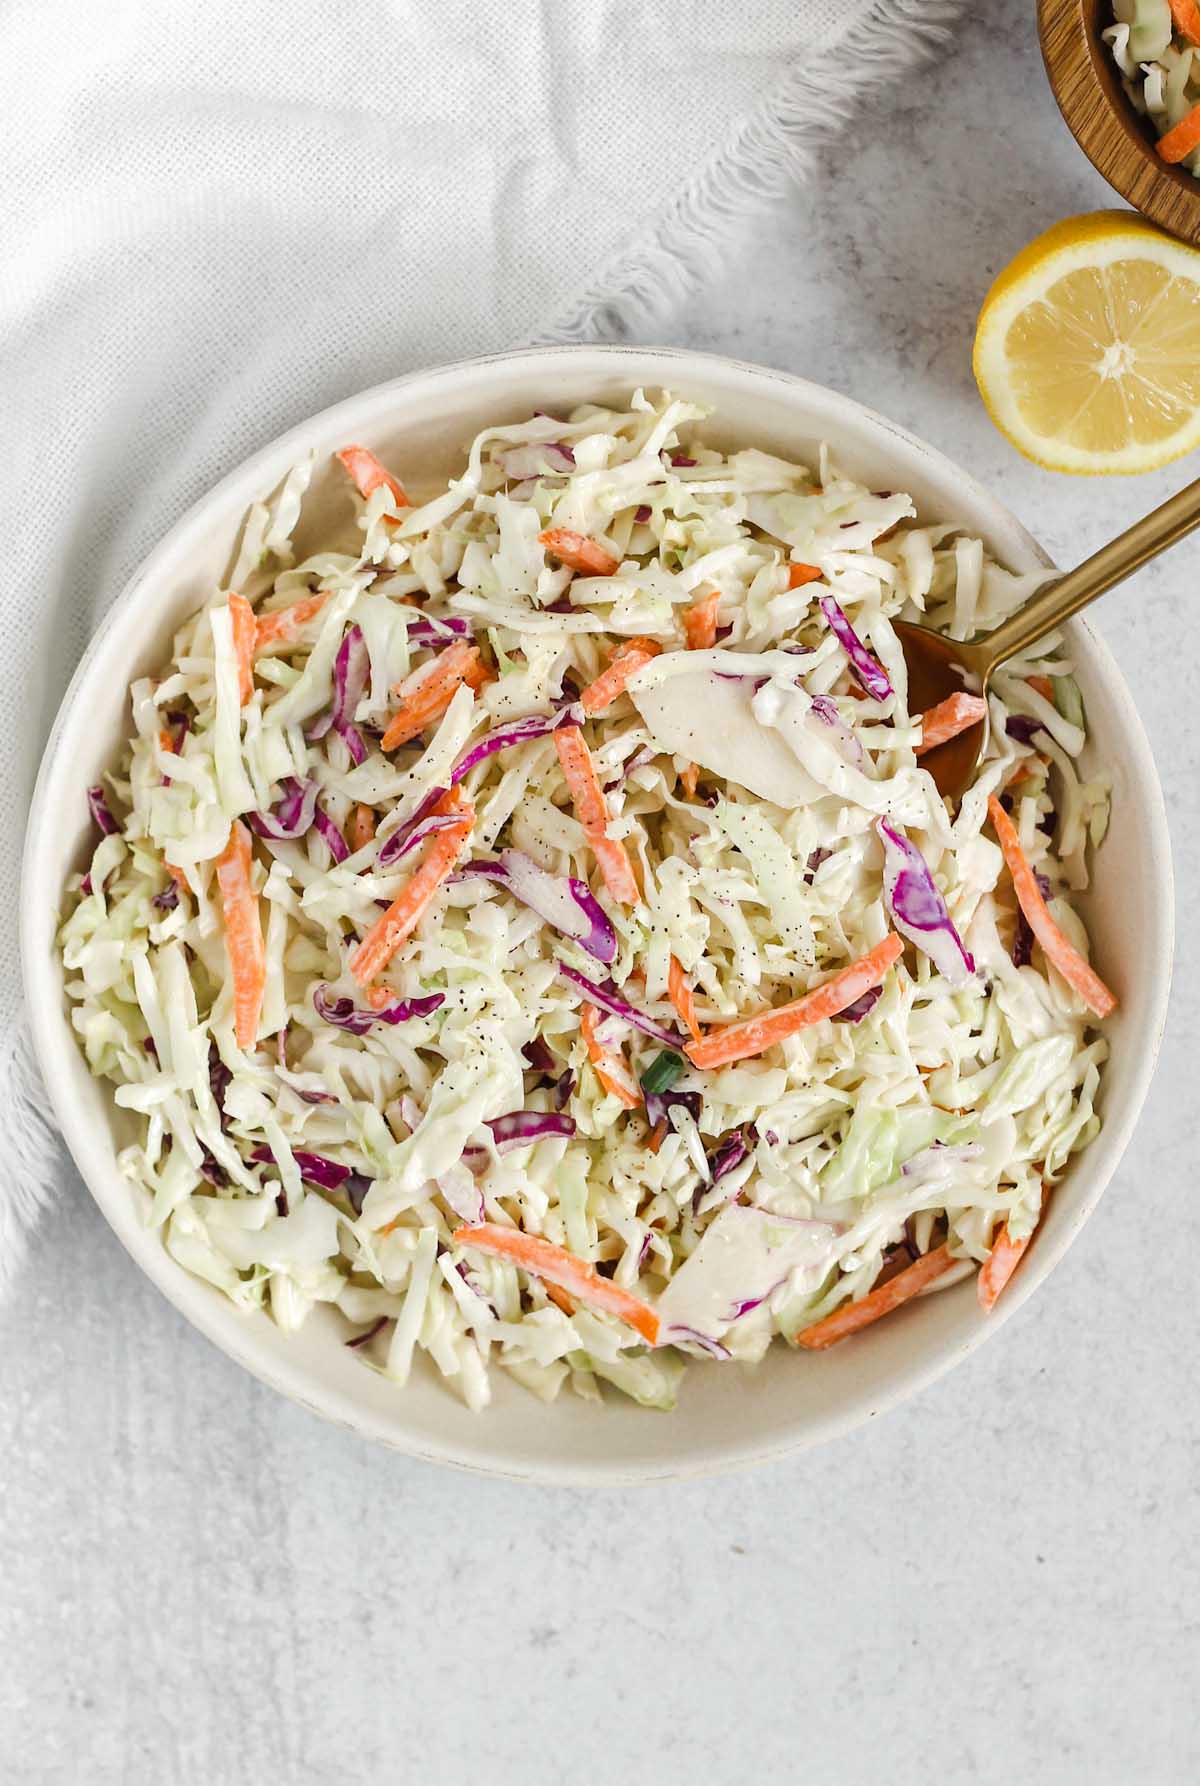 Whole30/Paleo coleslaw in a serving dish with a gold spoon.